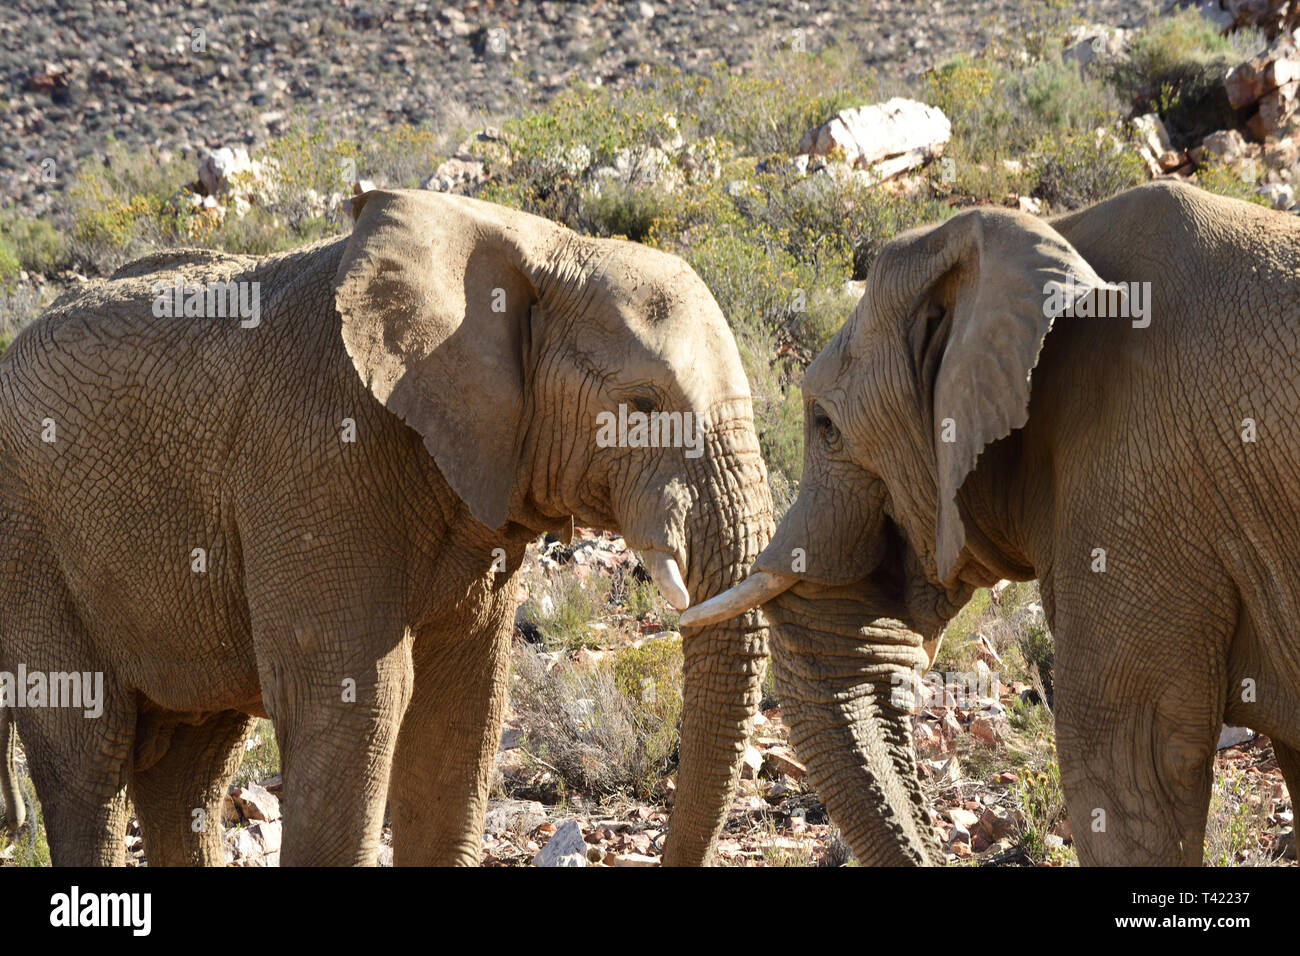 African Elephants in the wild Stock Photo